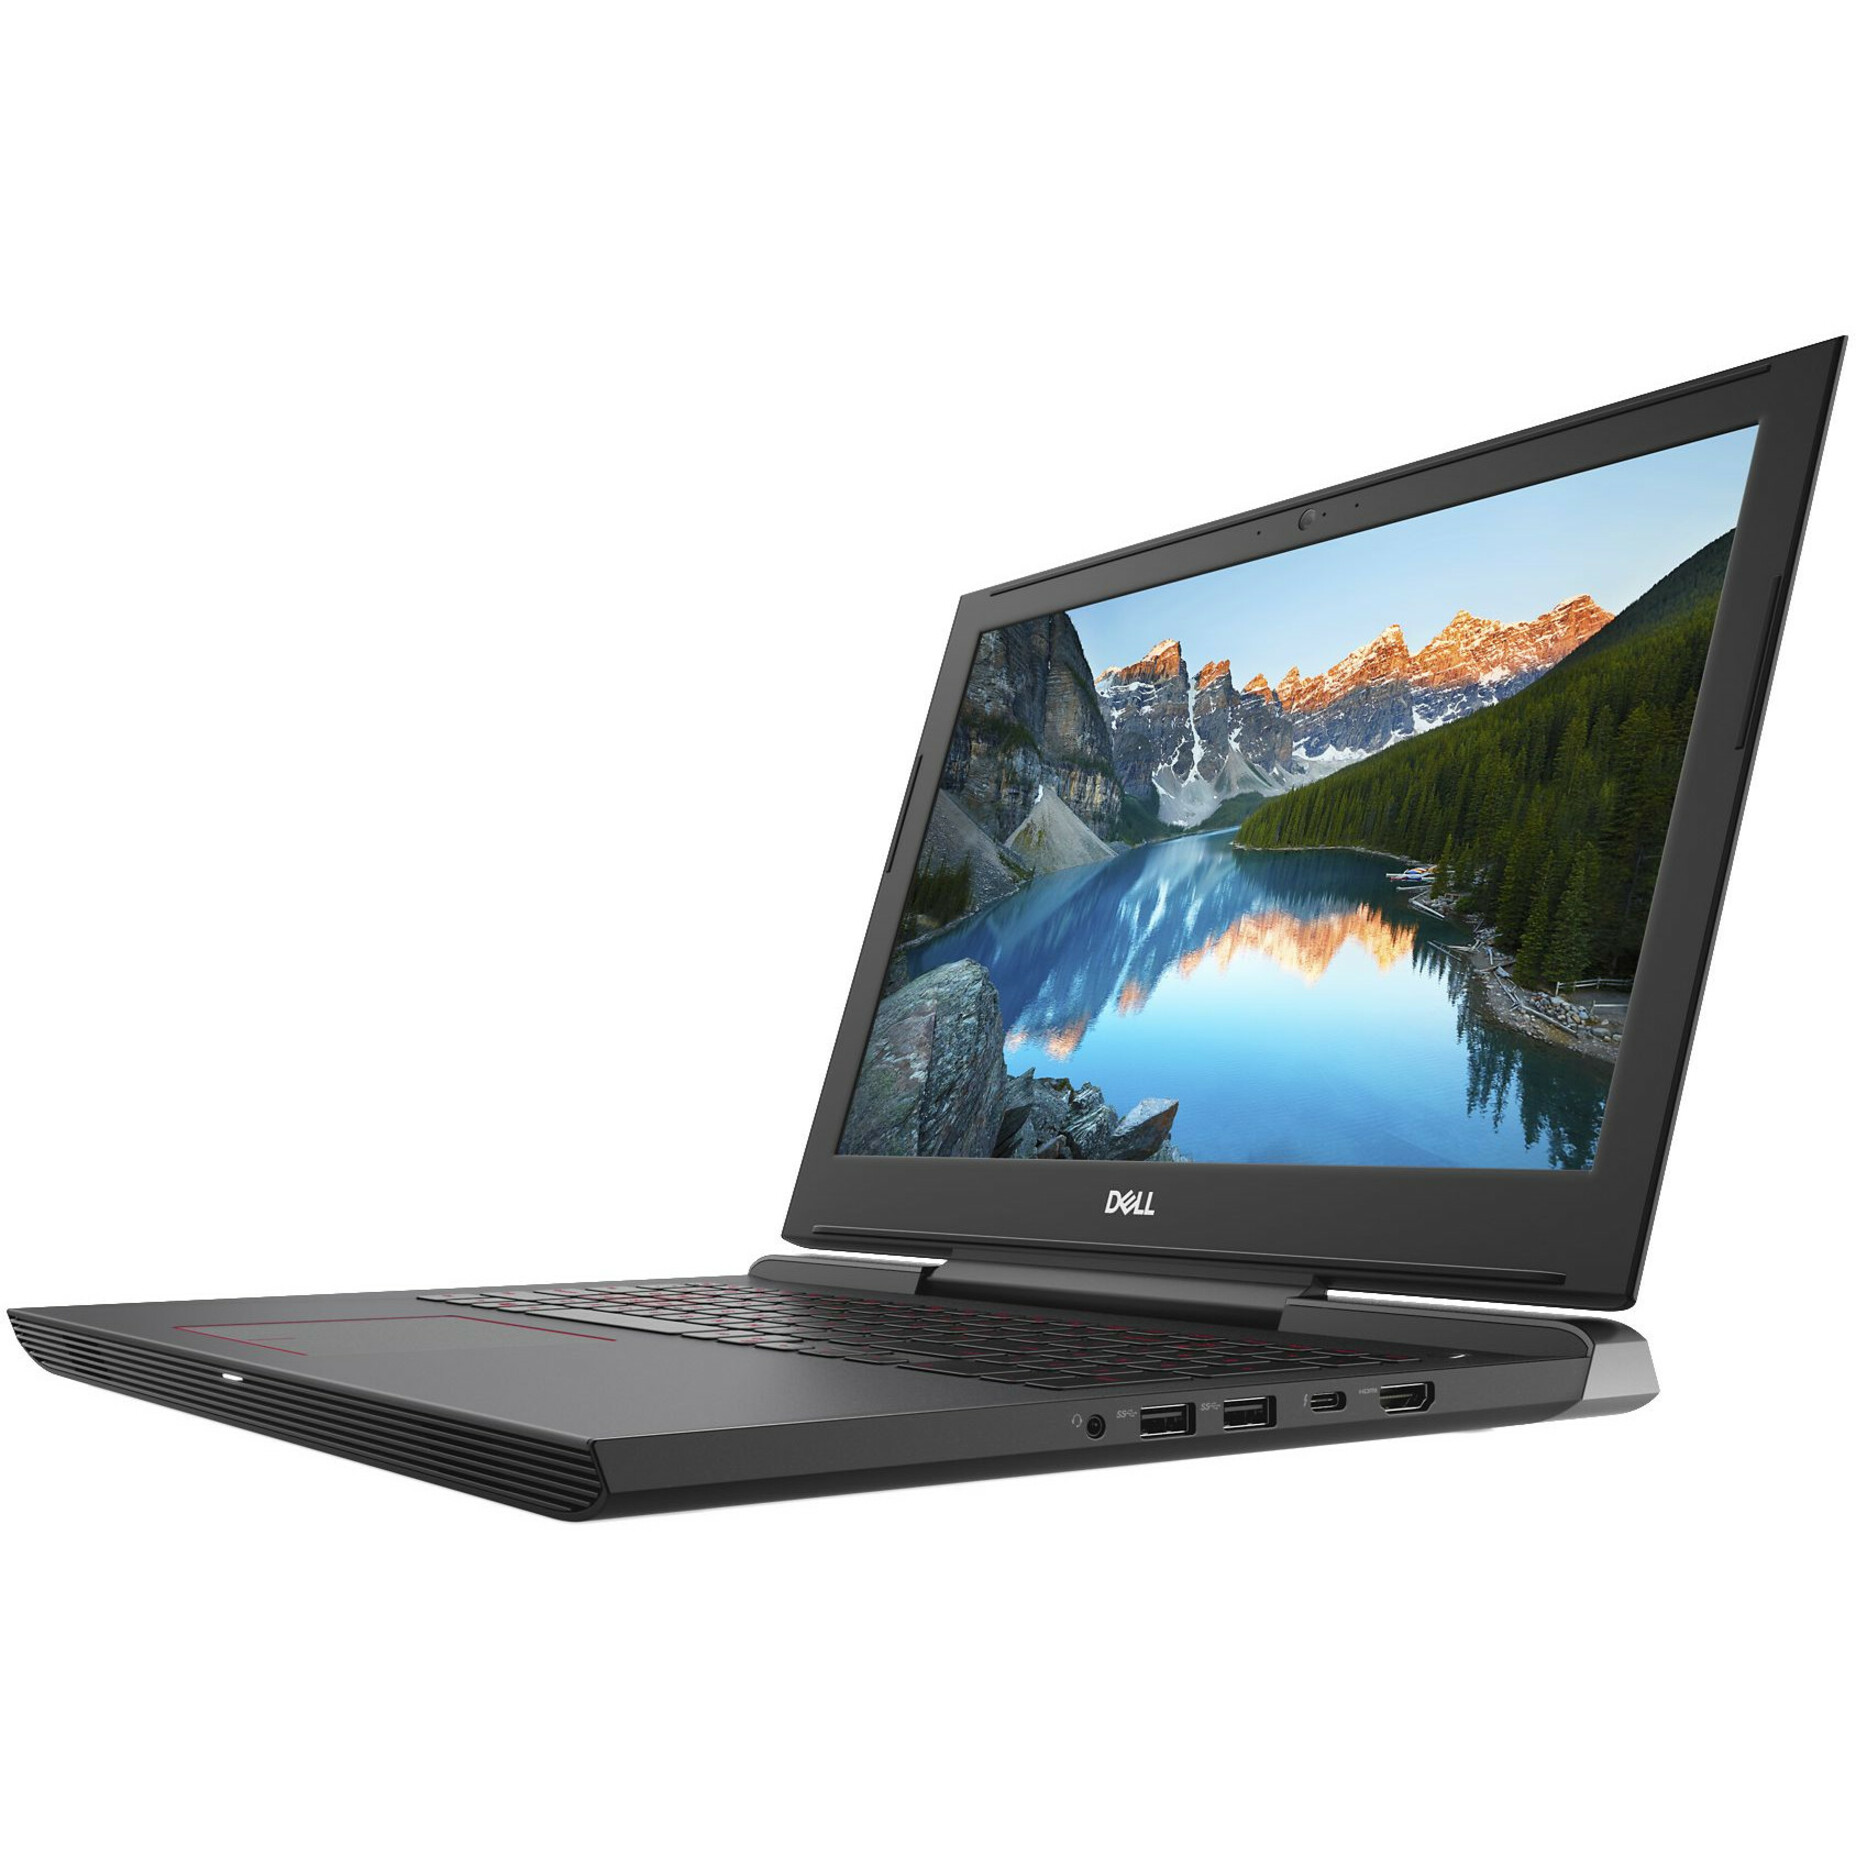 Dell Inspiron 15 7577 15.6 inch Gaming Laptop, Intel Core i5-7300HQ, 8GB Memory, 128GB Solid State Drive + 1TB HDD, NVIDIA® GeForce® GTX 1060 - image 19 of 23